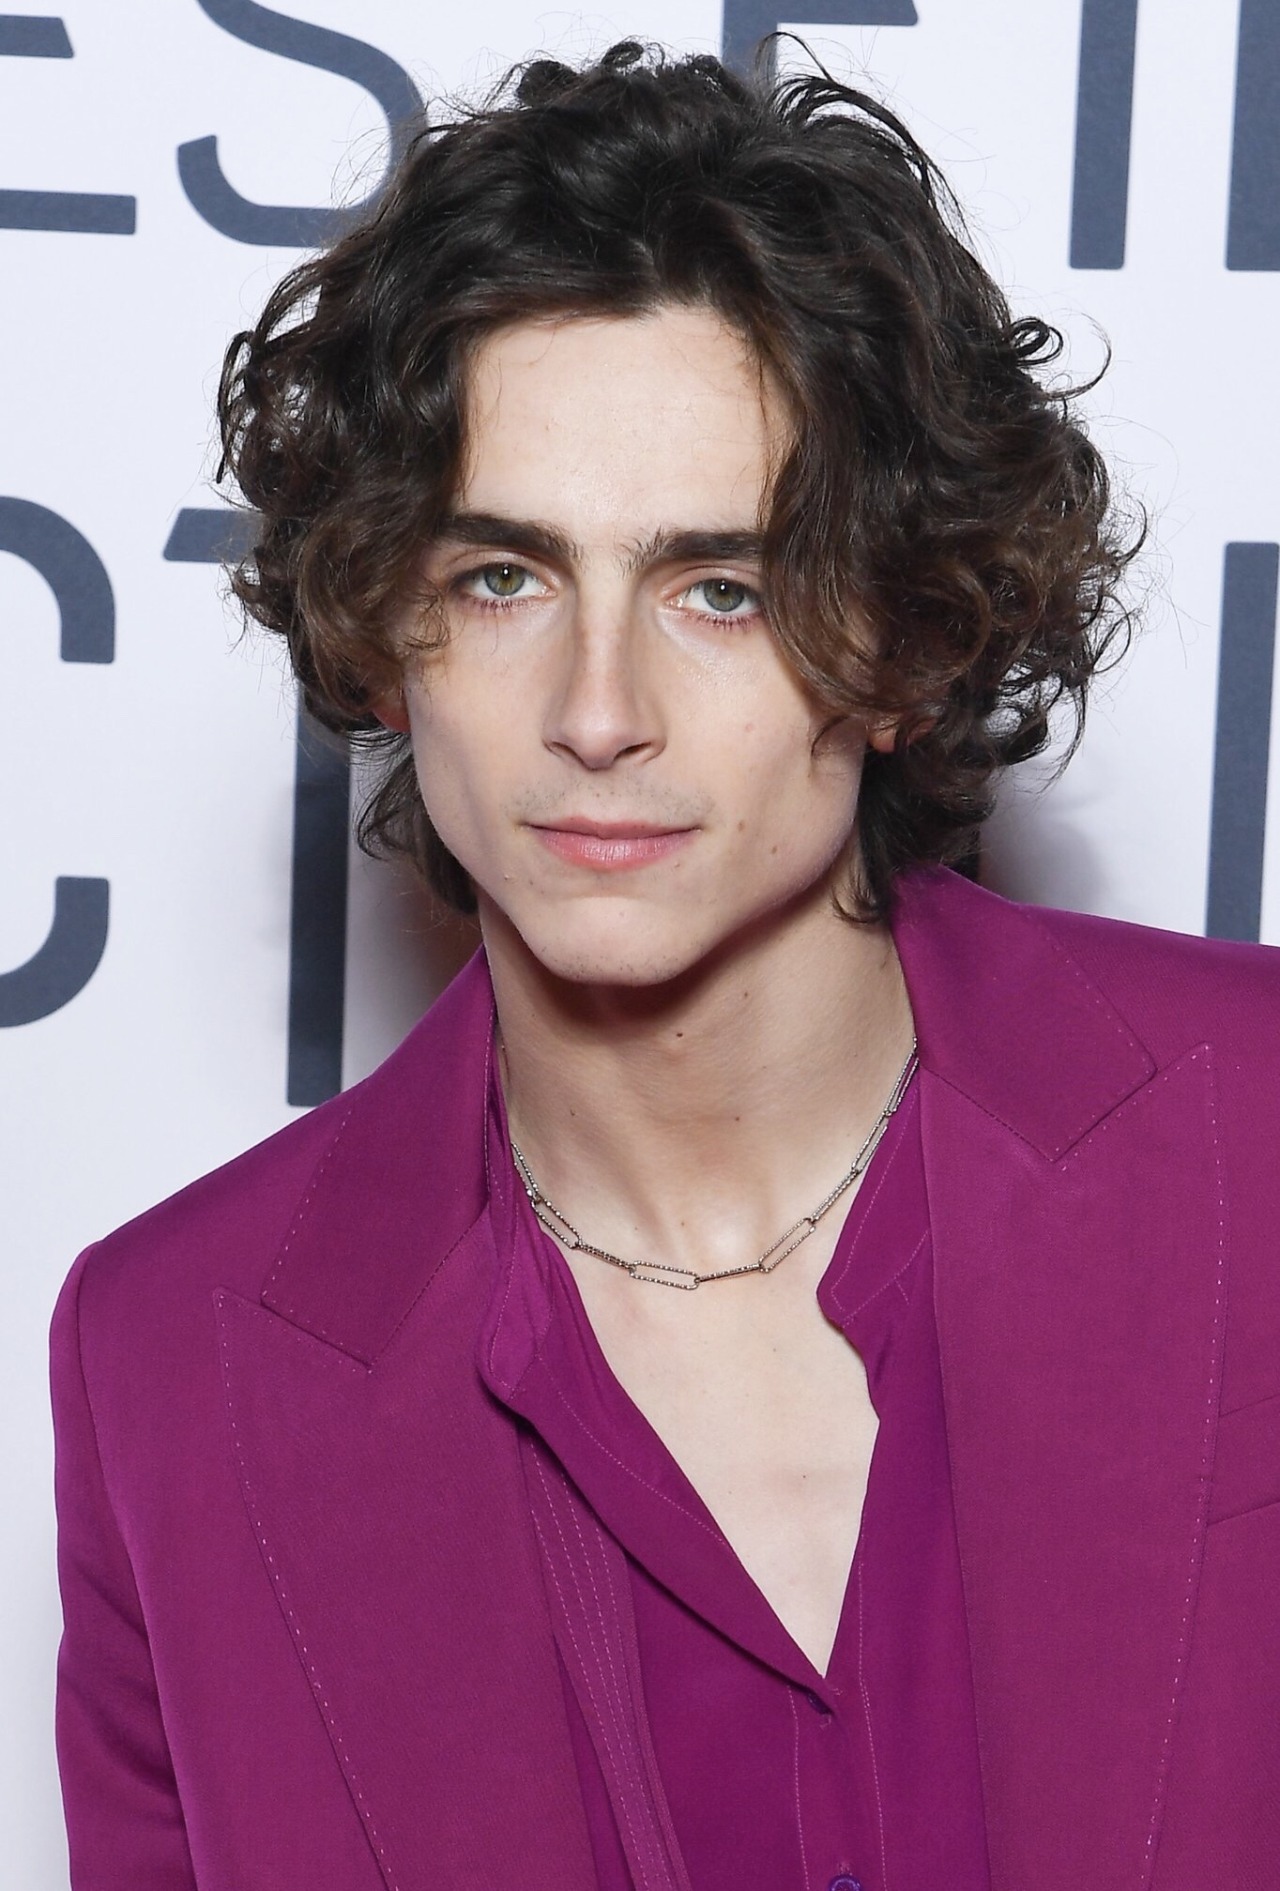 Timothée Chalamet — That hair tuck is ALWAYS on point IG credit to...